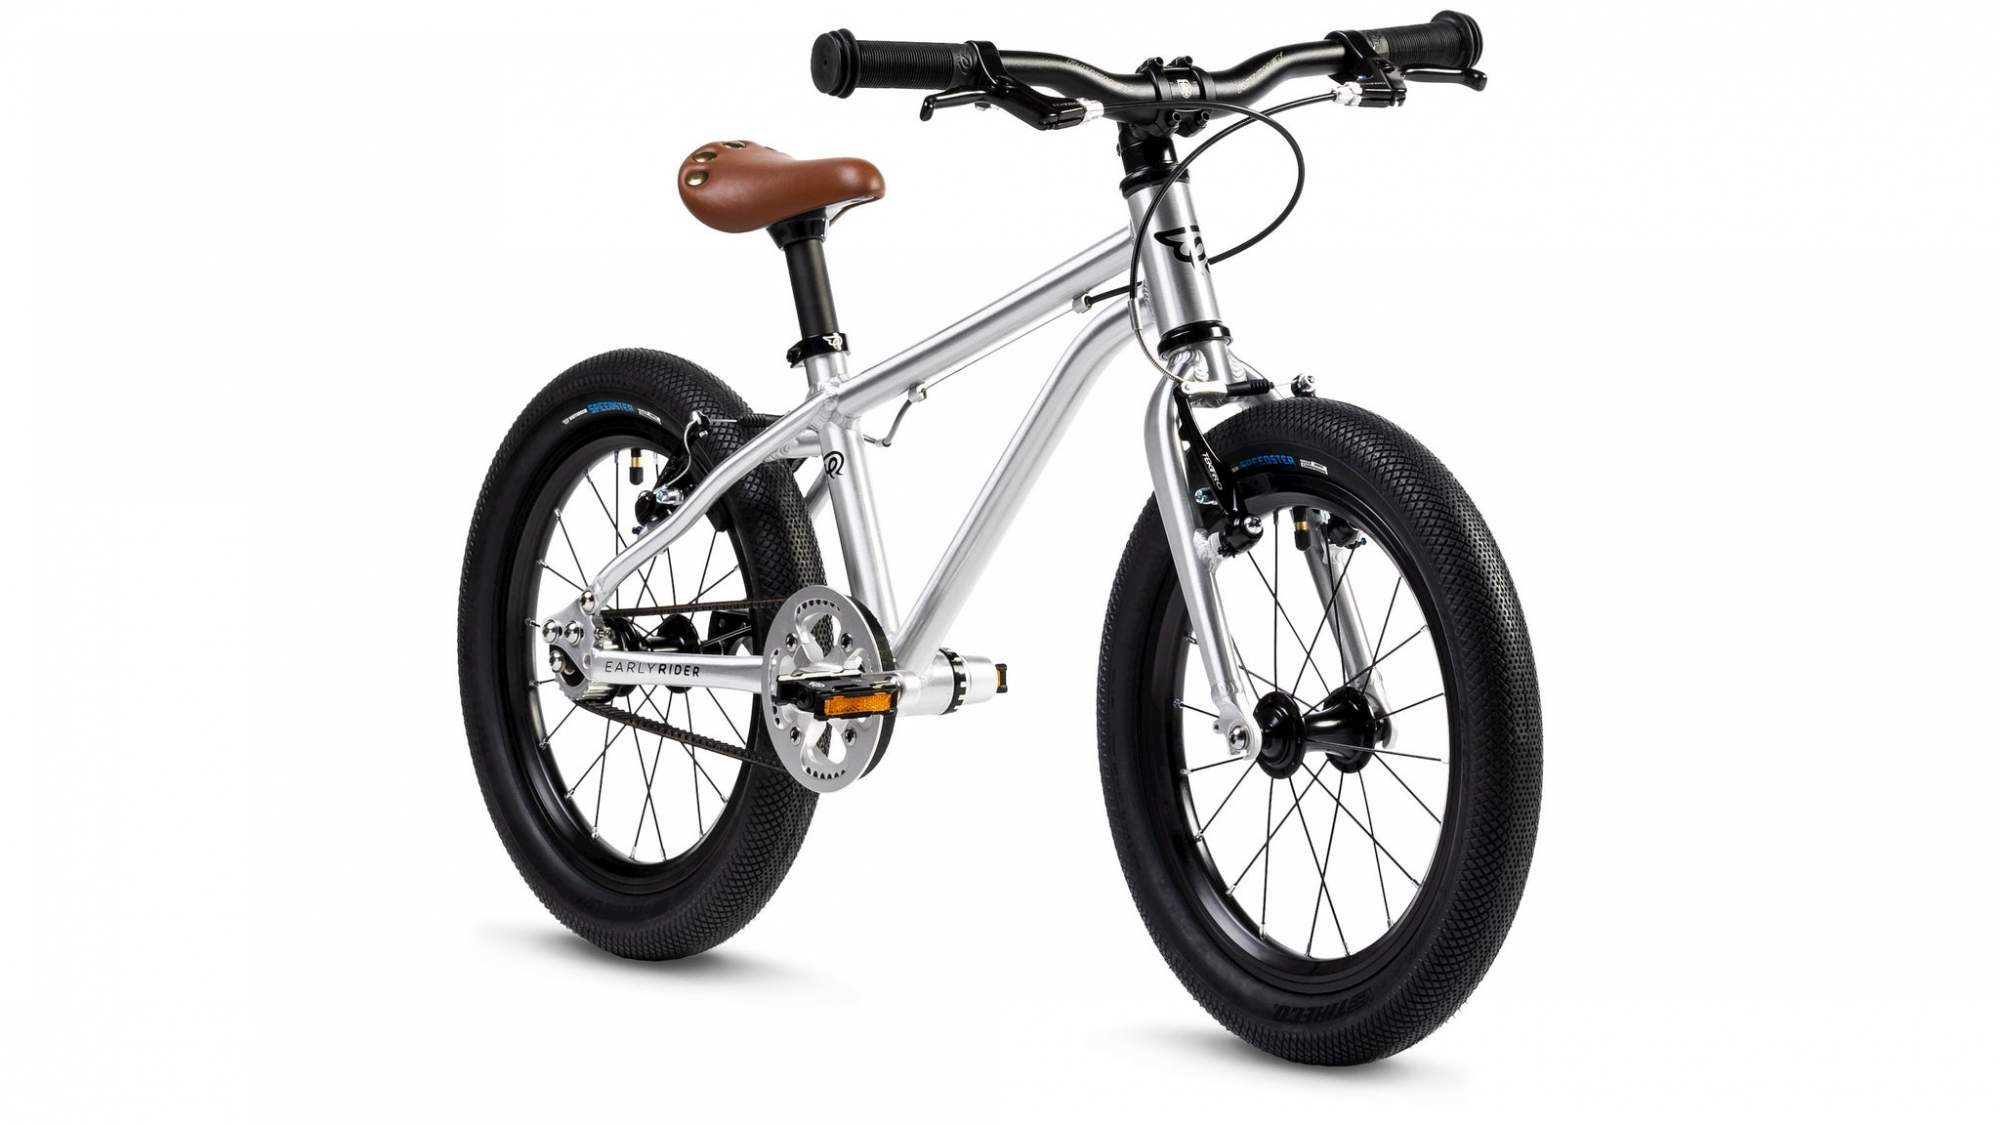 Велосипед early Rider Seeker 16. Early Rider Belter 20. Early Rider велосипед 24 Belter. Детский велосипед early Rider. Early 16